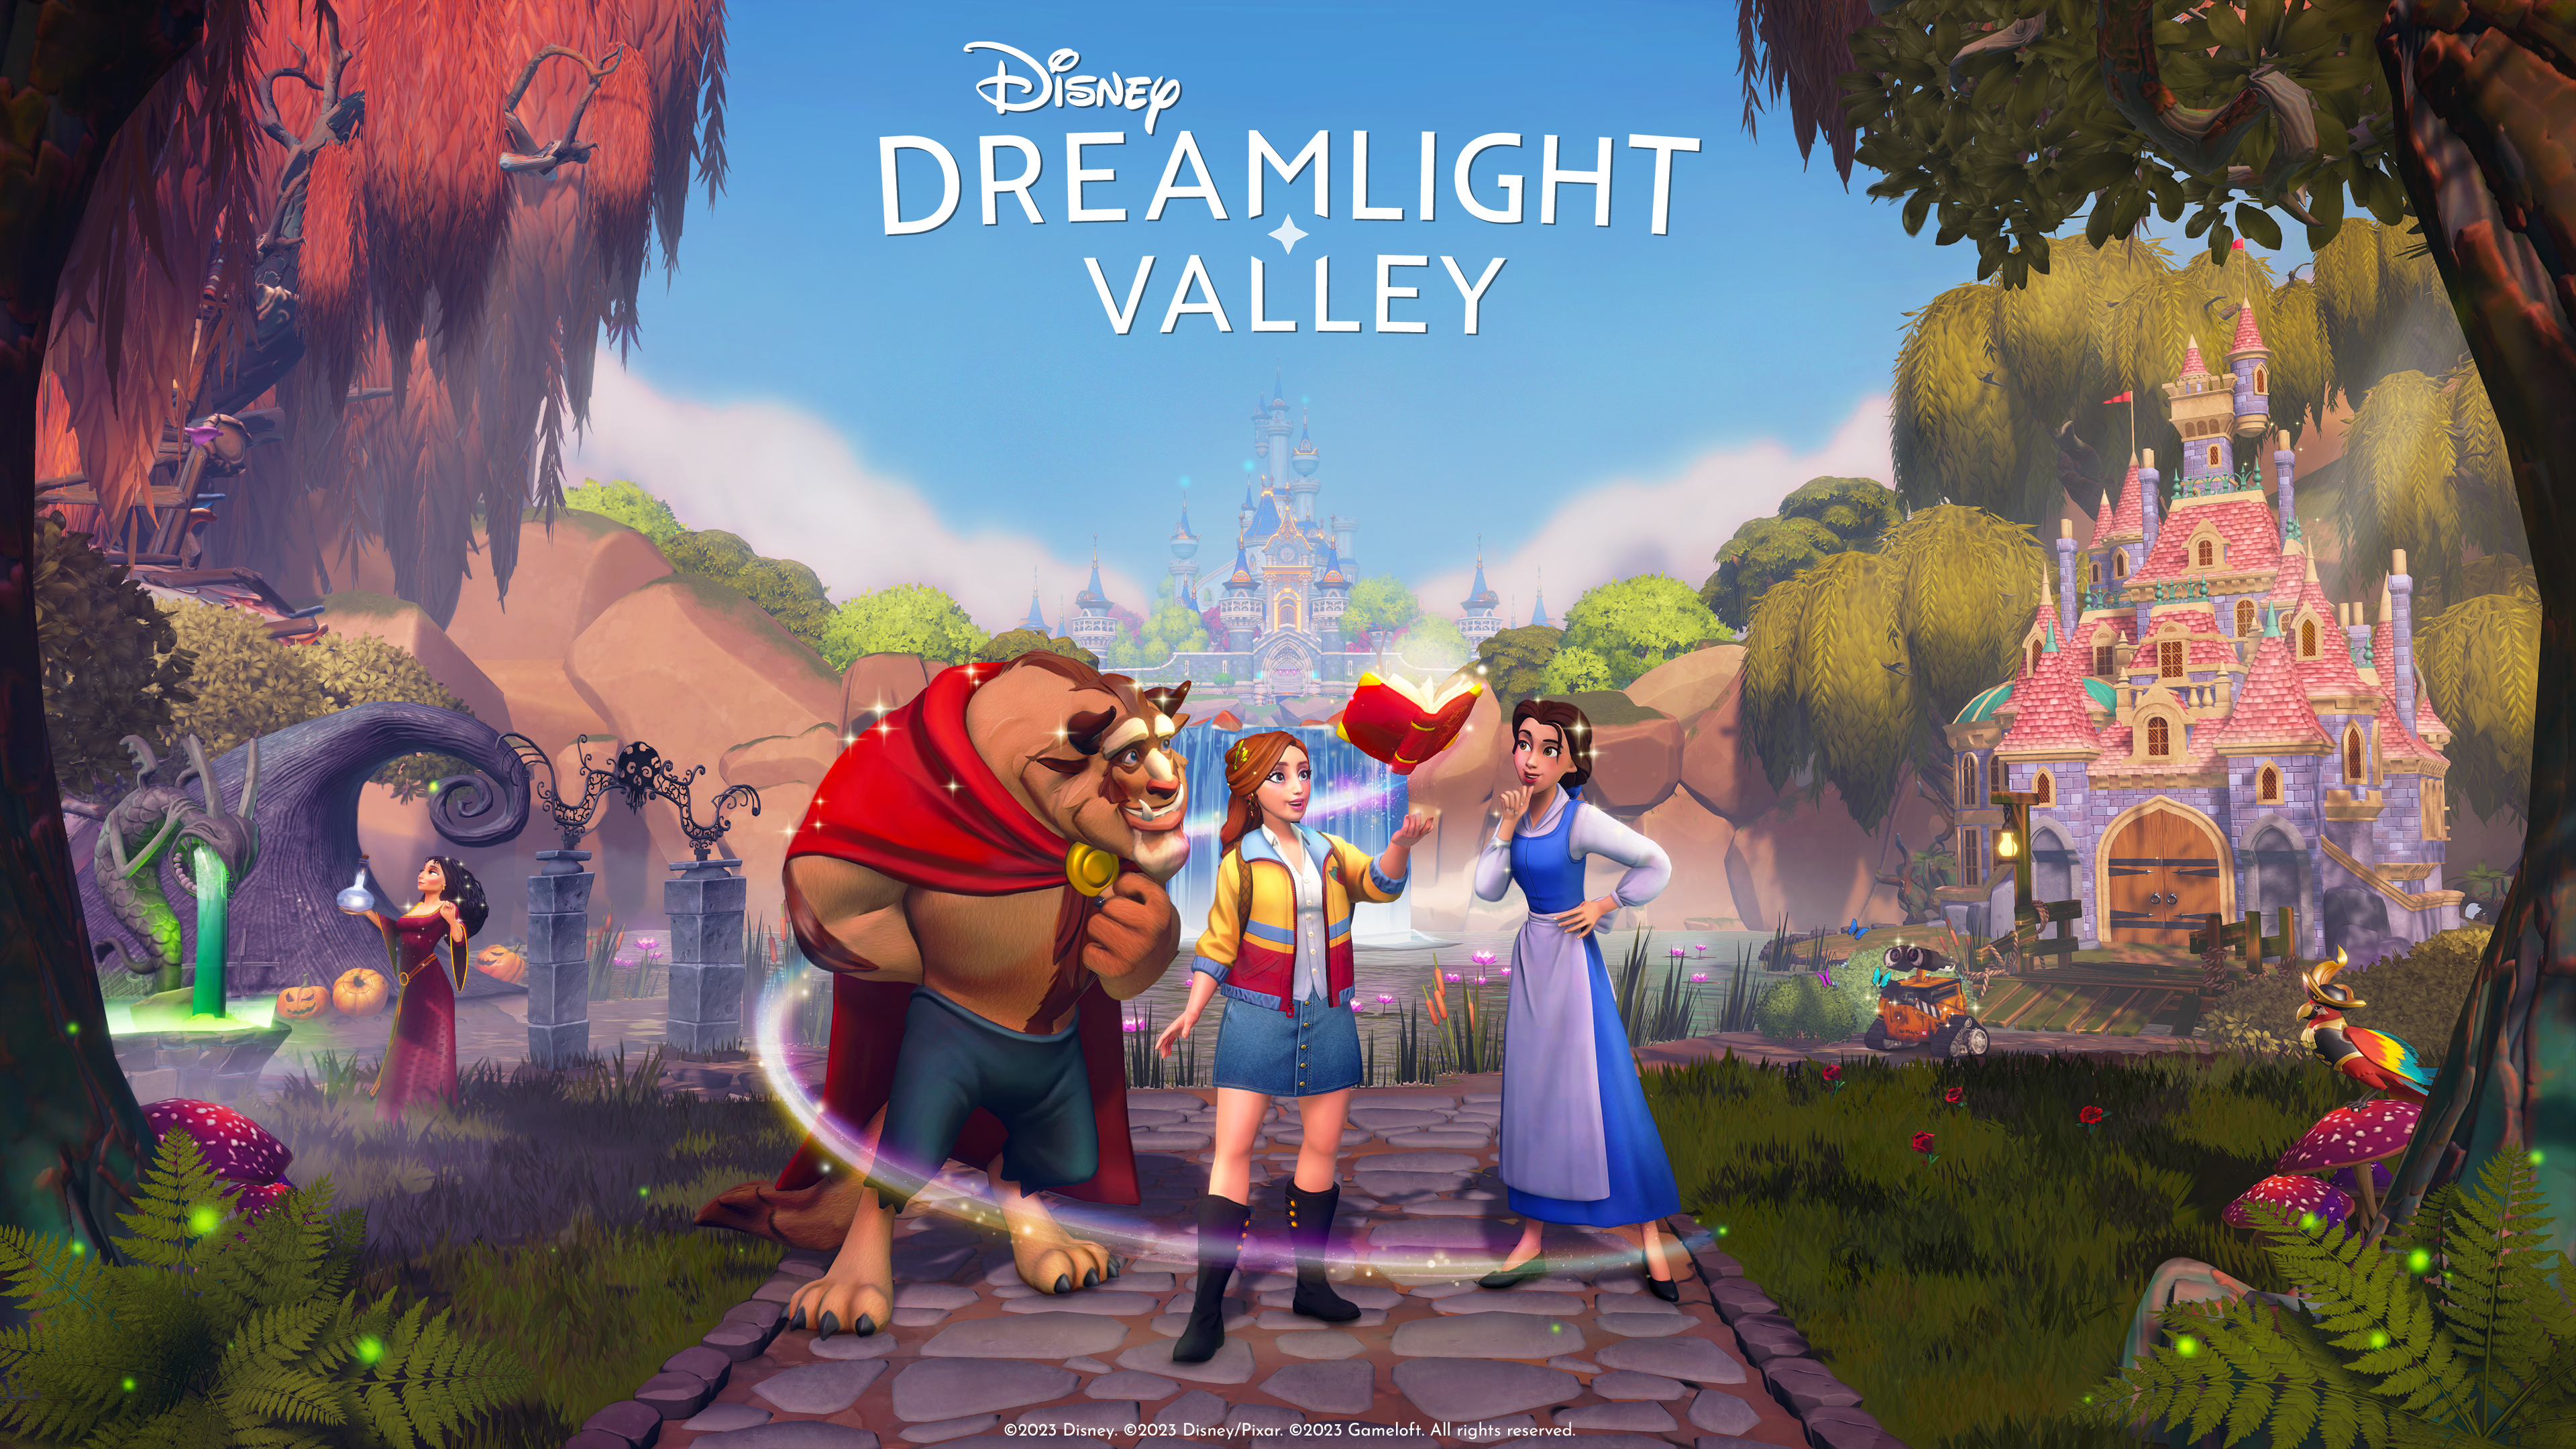 HD Disney Dreamlight Valley desktop wallpaper featuring animated characters on a magical path with a fairytale castle background.